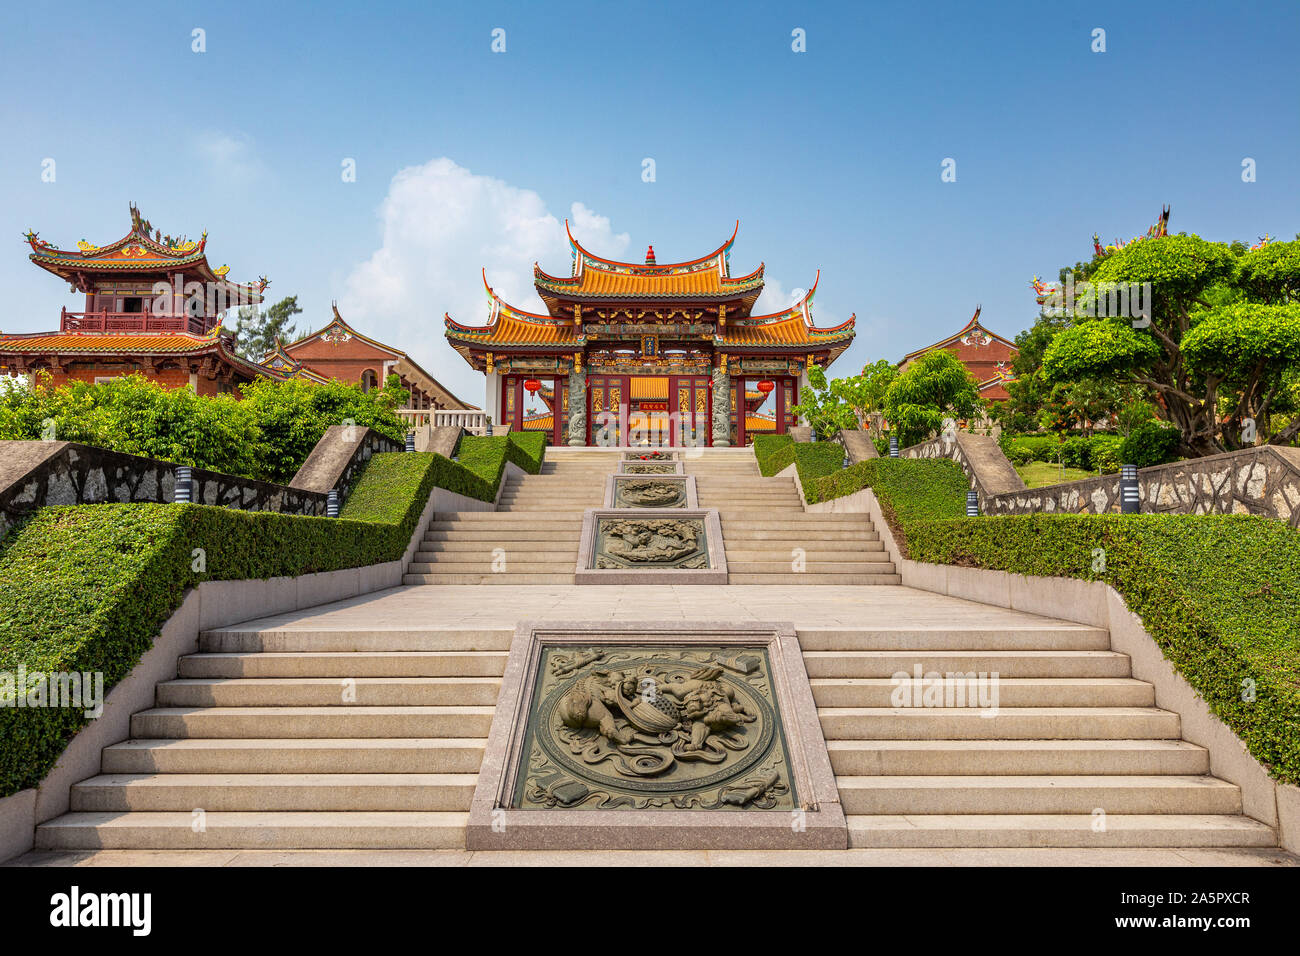 A-Ma Cultural Village at Macau, China. the translation of the chinese characters is "Macau Tin Hau Temple" Stock Photo